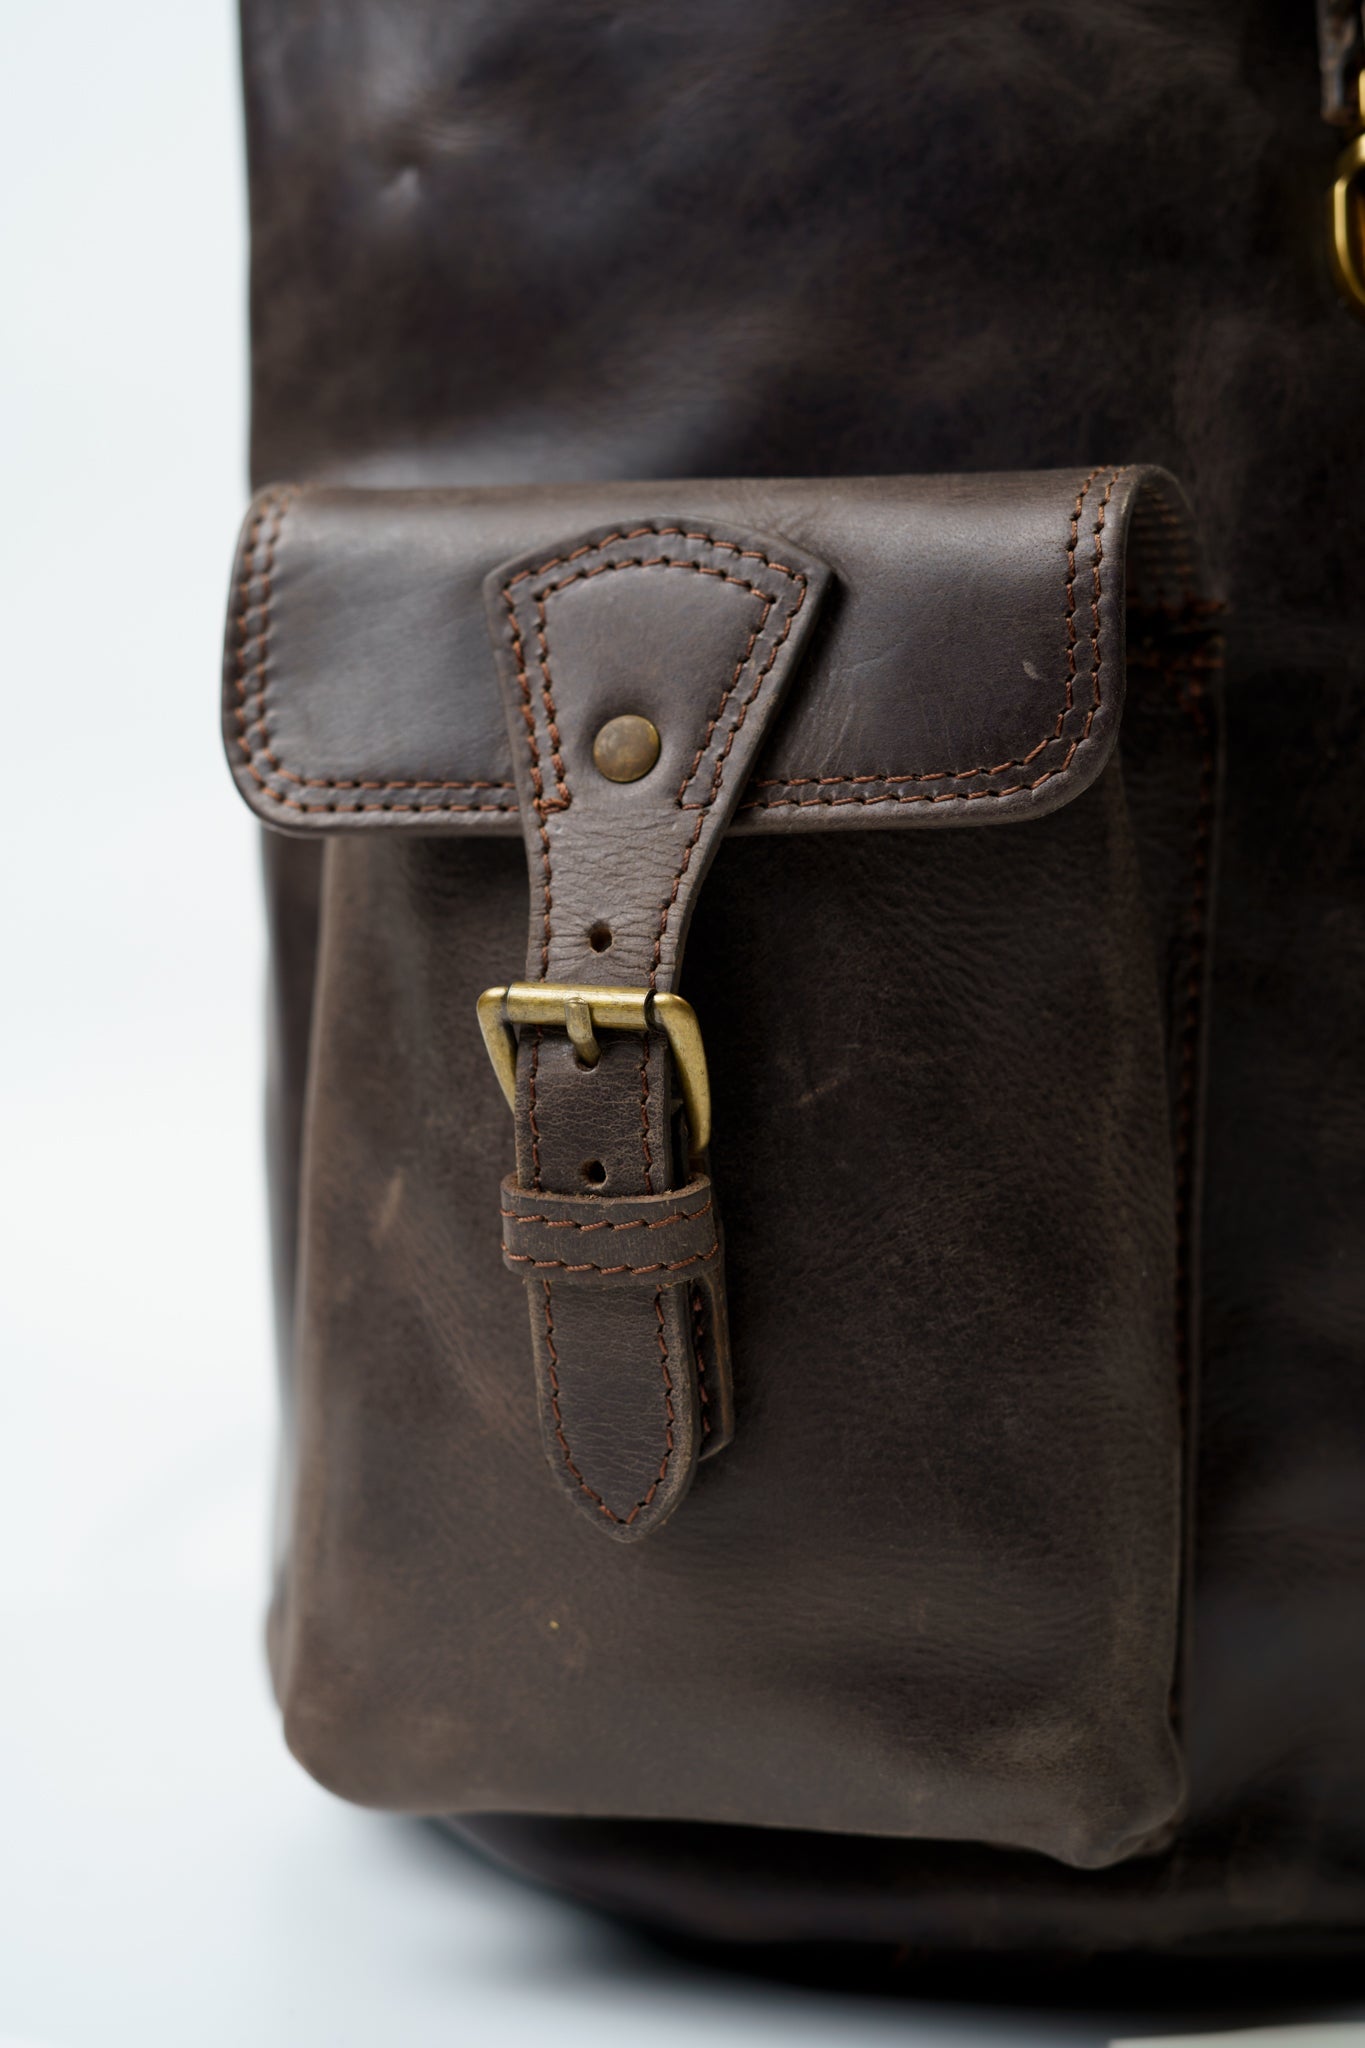 Close-up of the high-quality straps on the outside pockets of Chamra's utility leather backpack.